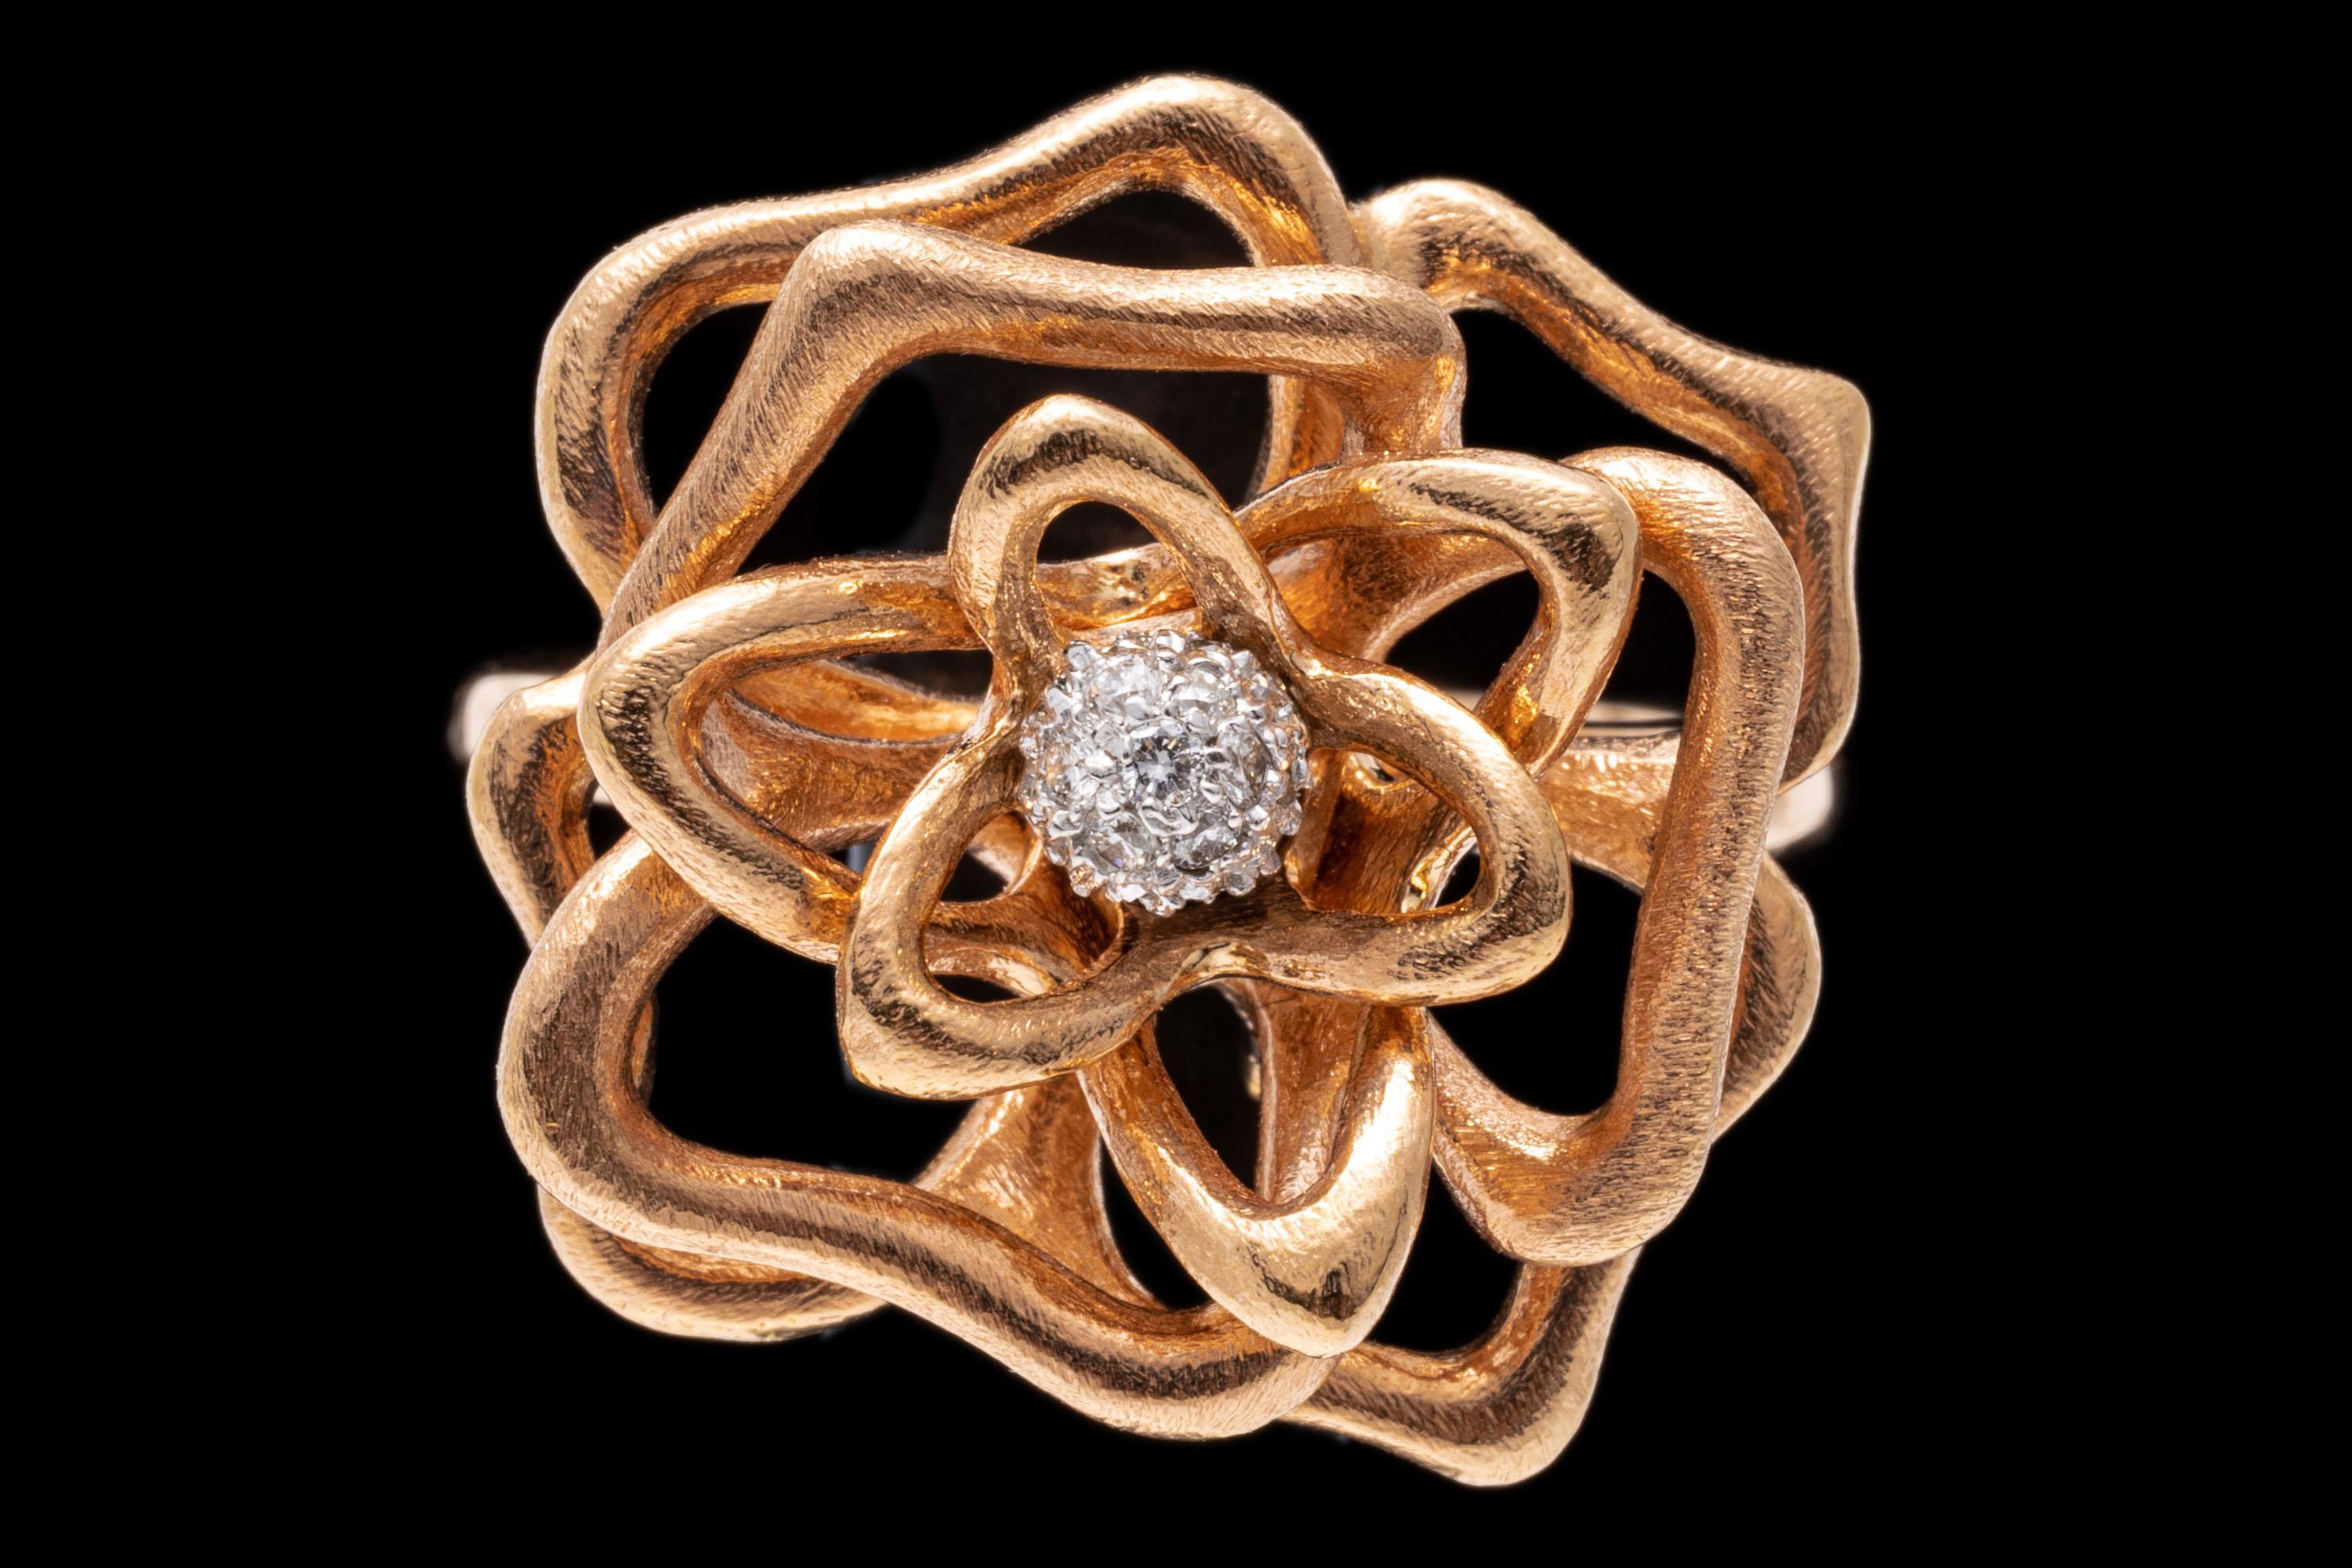 18k rose gold ring. This delightful ring by Roberto Coin is a an open figural rose motif, set in the center with a pave set cluster of round faceted diamonds, approximately 0.10 TCW. The ring is decorated on the underside with the trademark Roberto